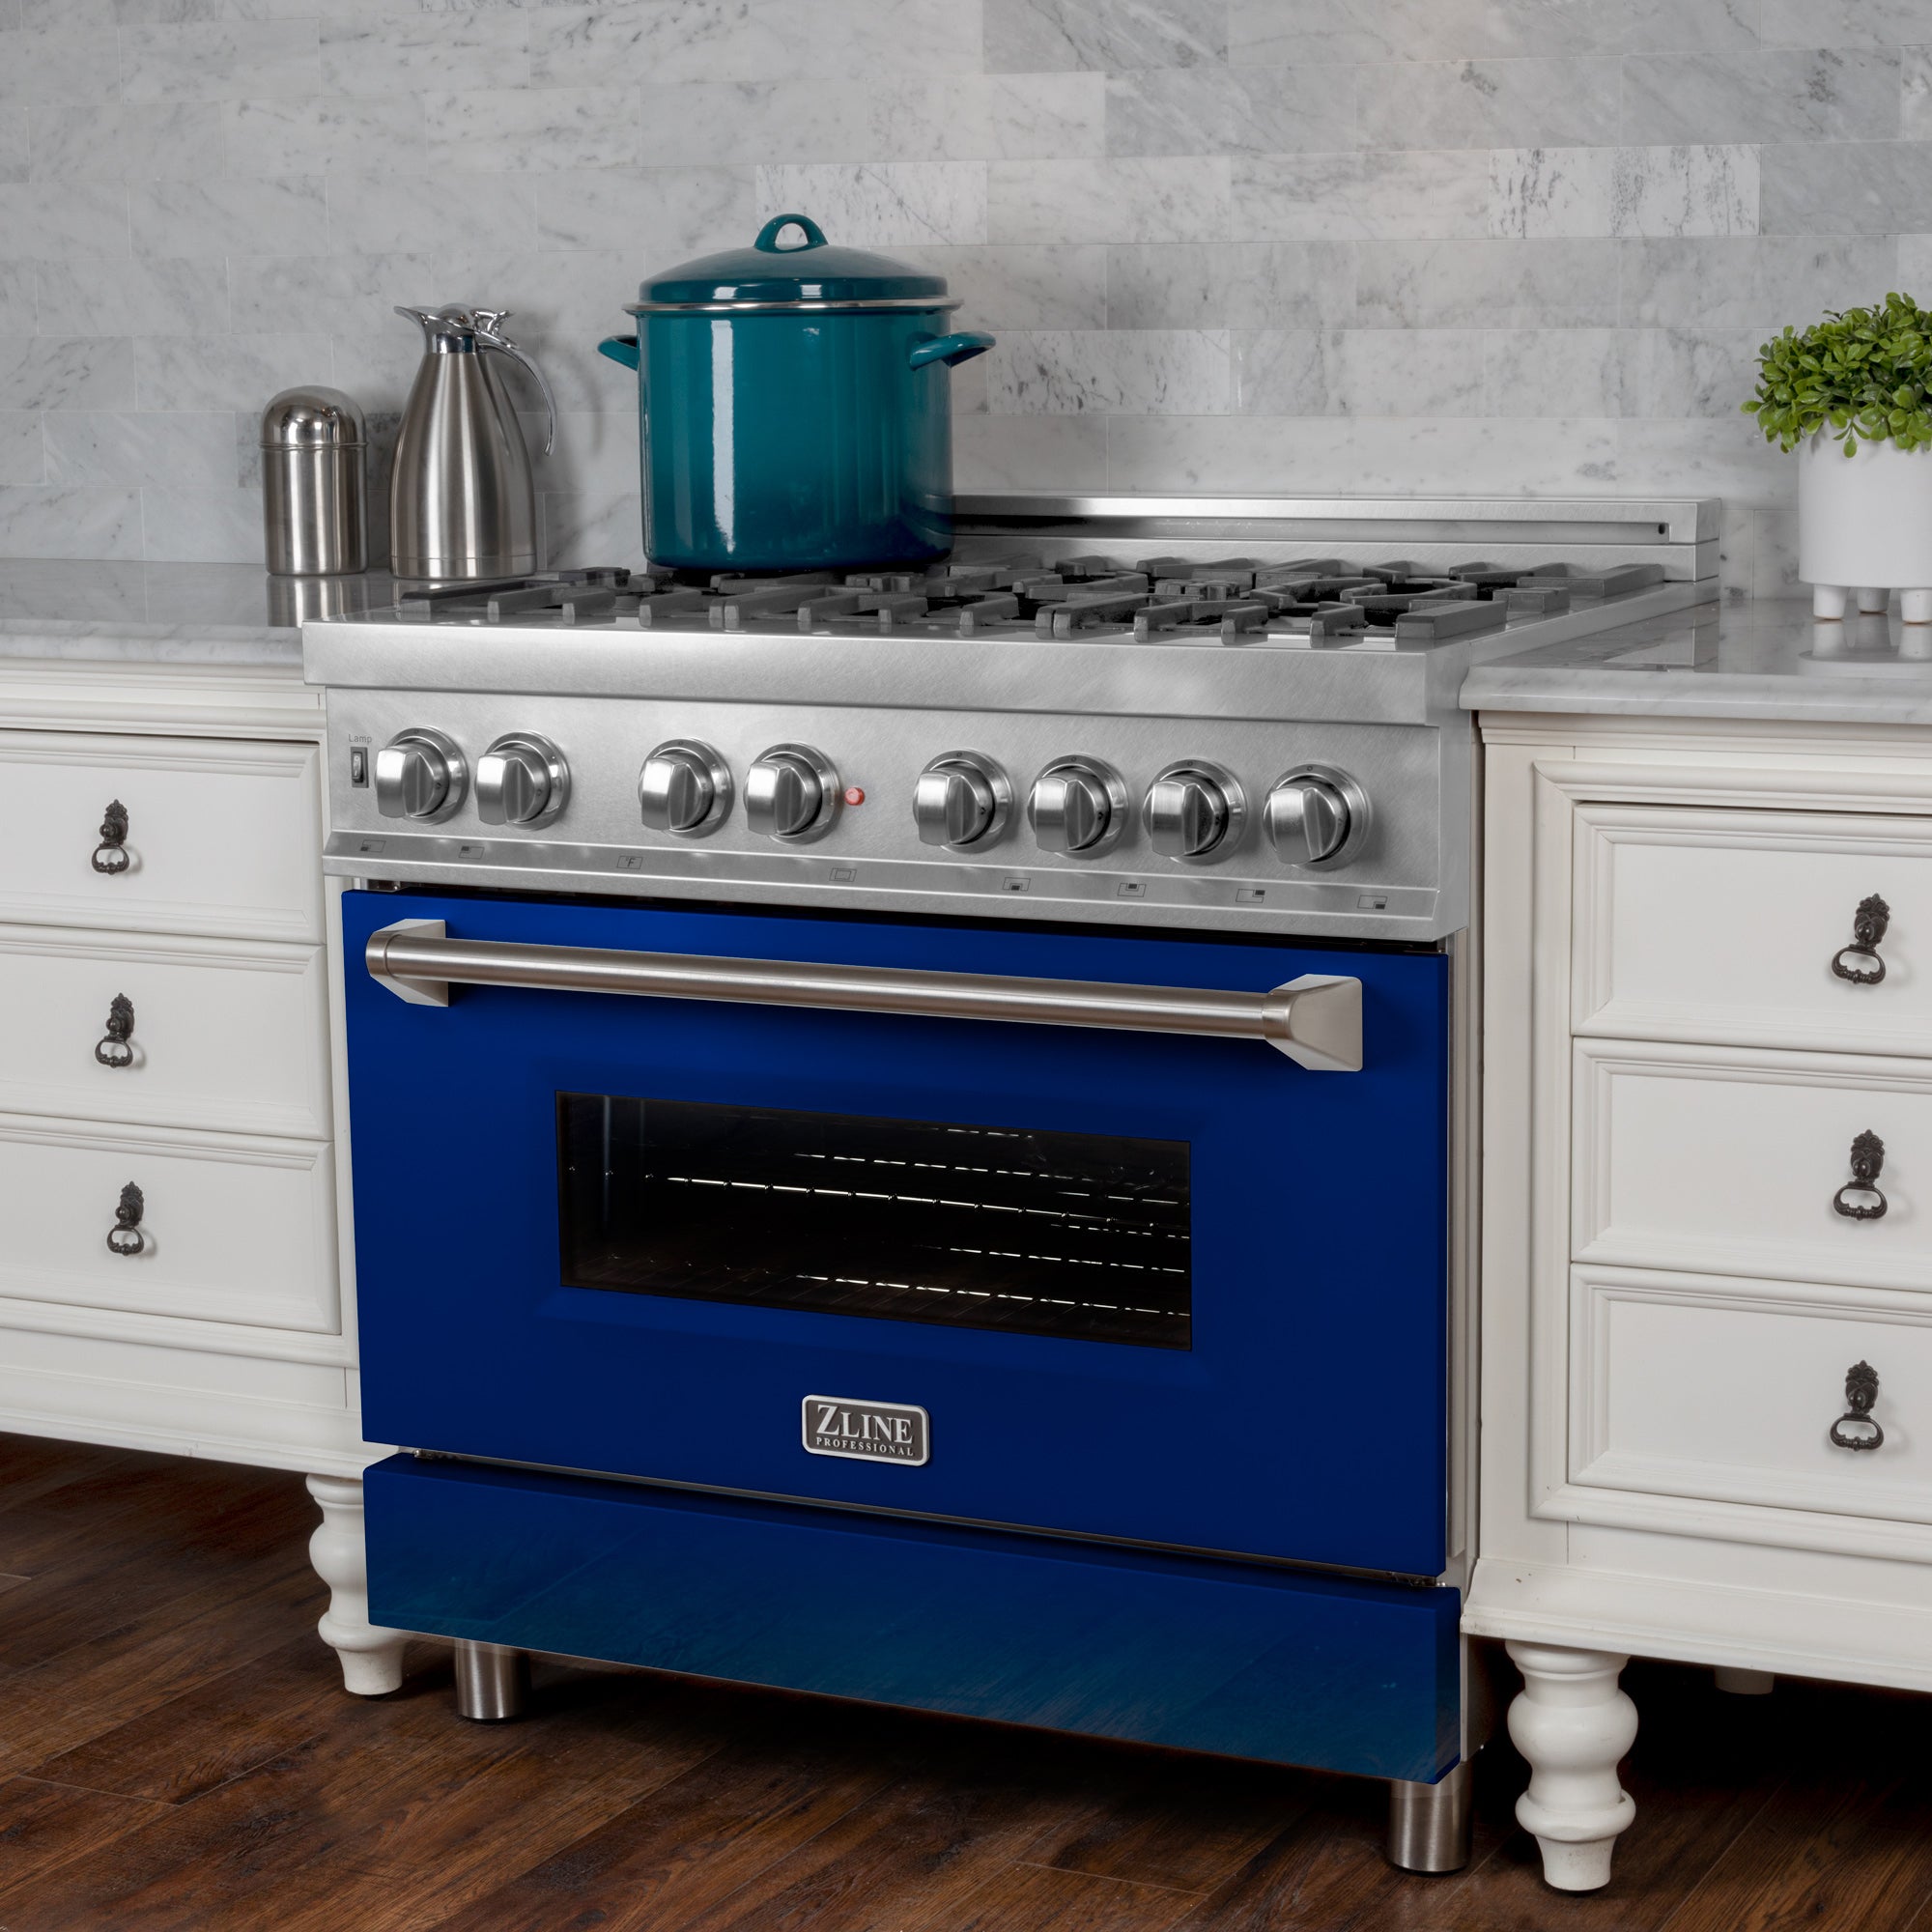 ZLINE 30" 4.0 cu. ft. Dual Fuel Range with Gas Stove and Electric Oven in Fingerprint Resistant Stainless Steel and Blue Gloss Door (RAS-BG-30)